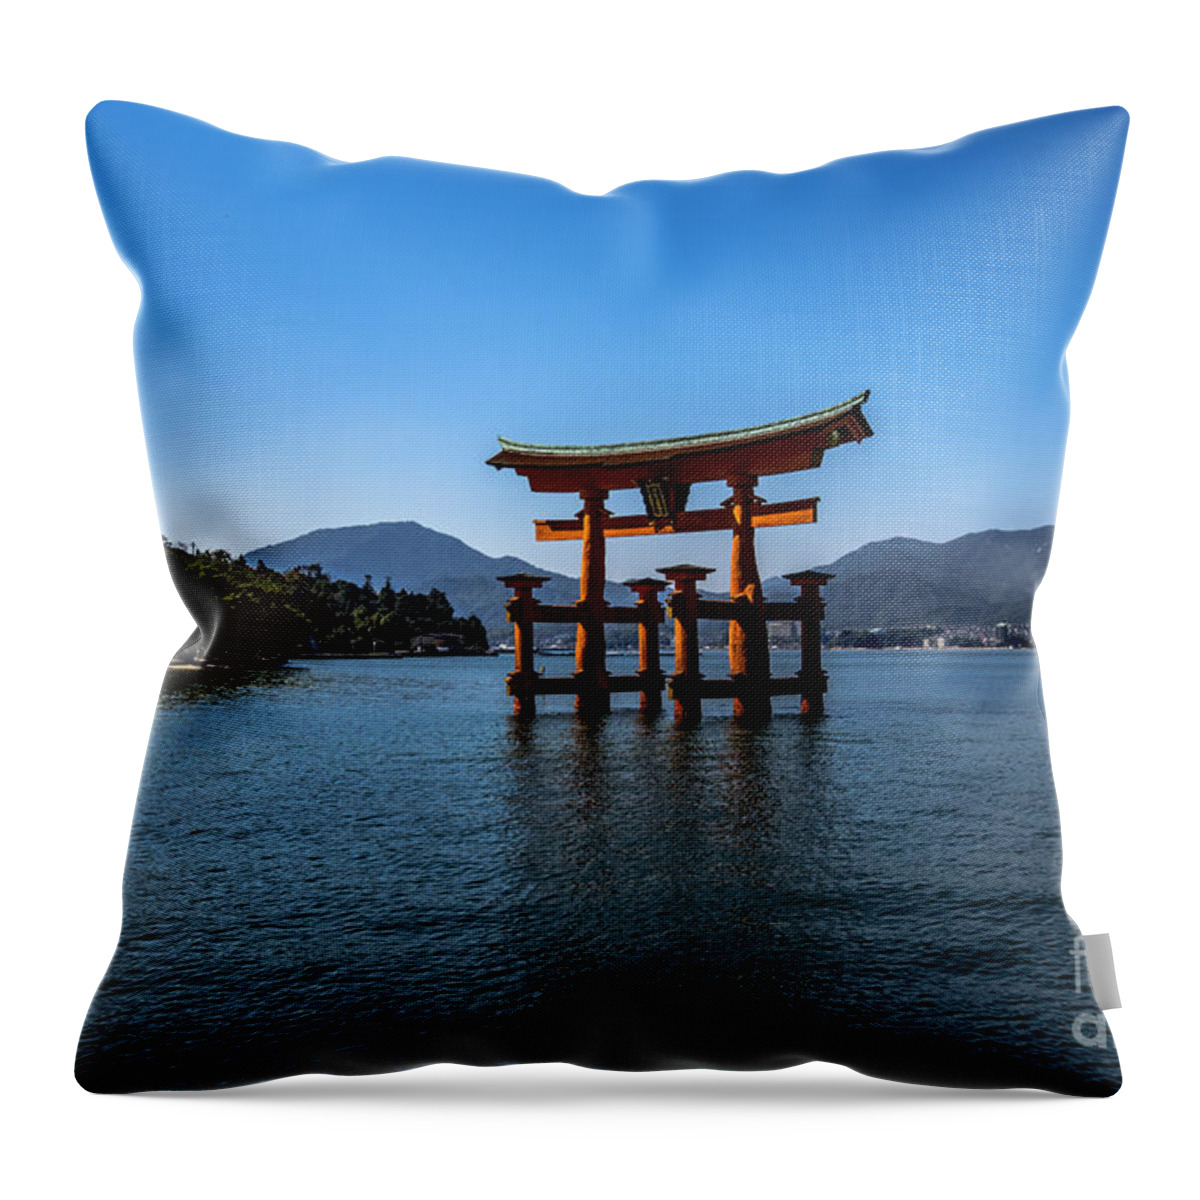 Landscape Throw Pillow featuring the photograph The Great Torii by Pravine Chester